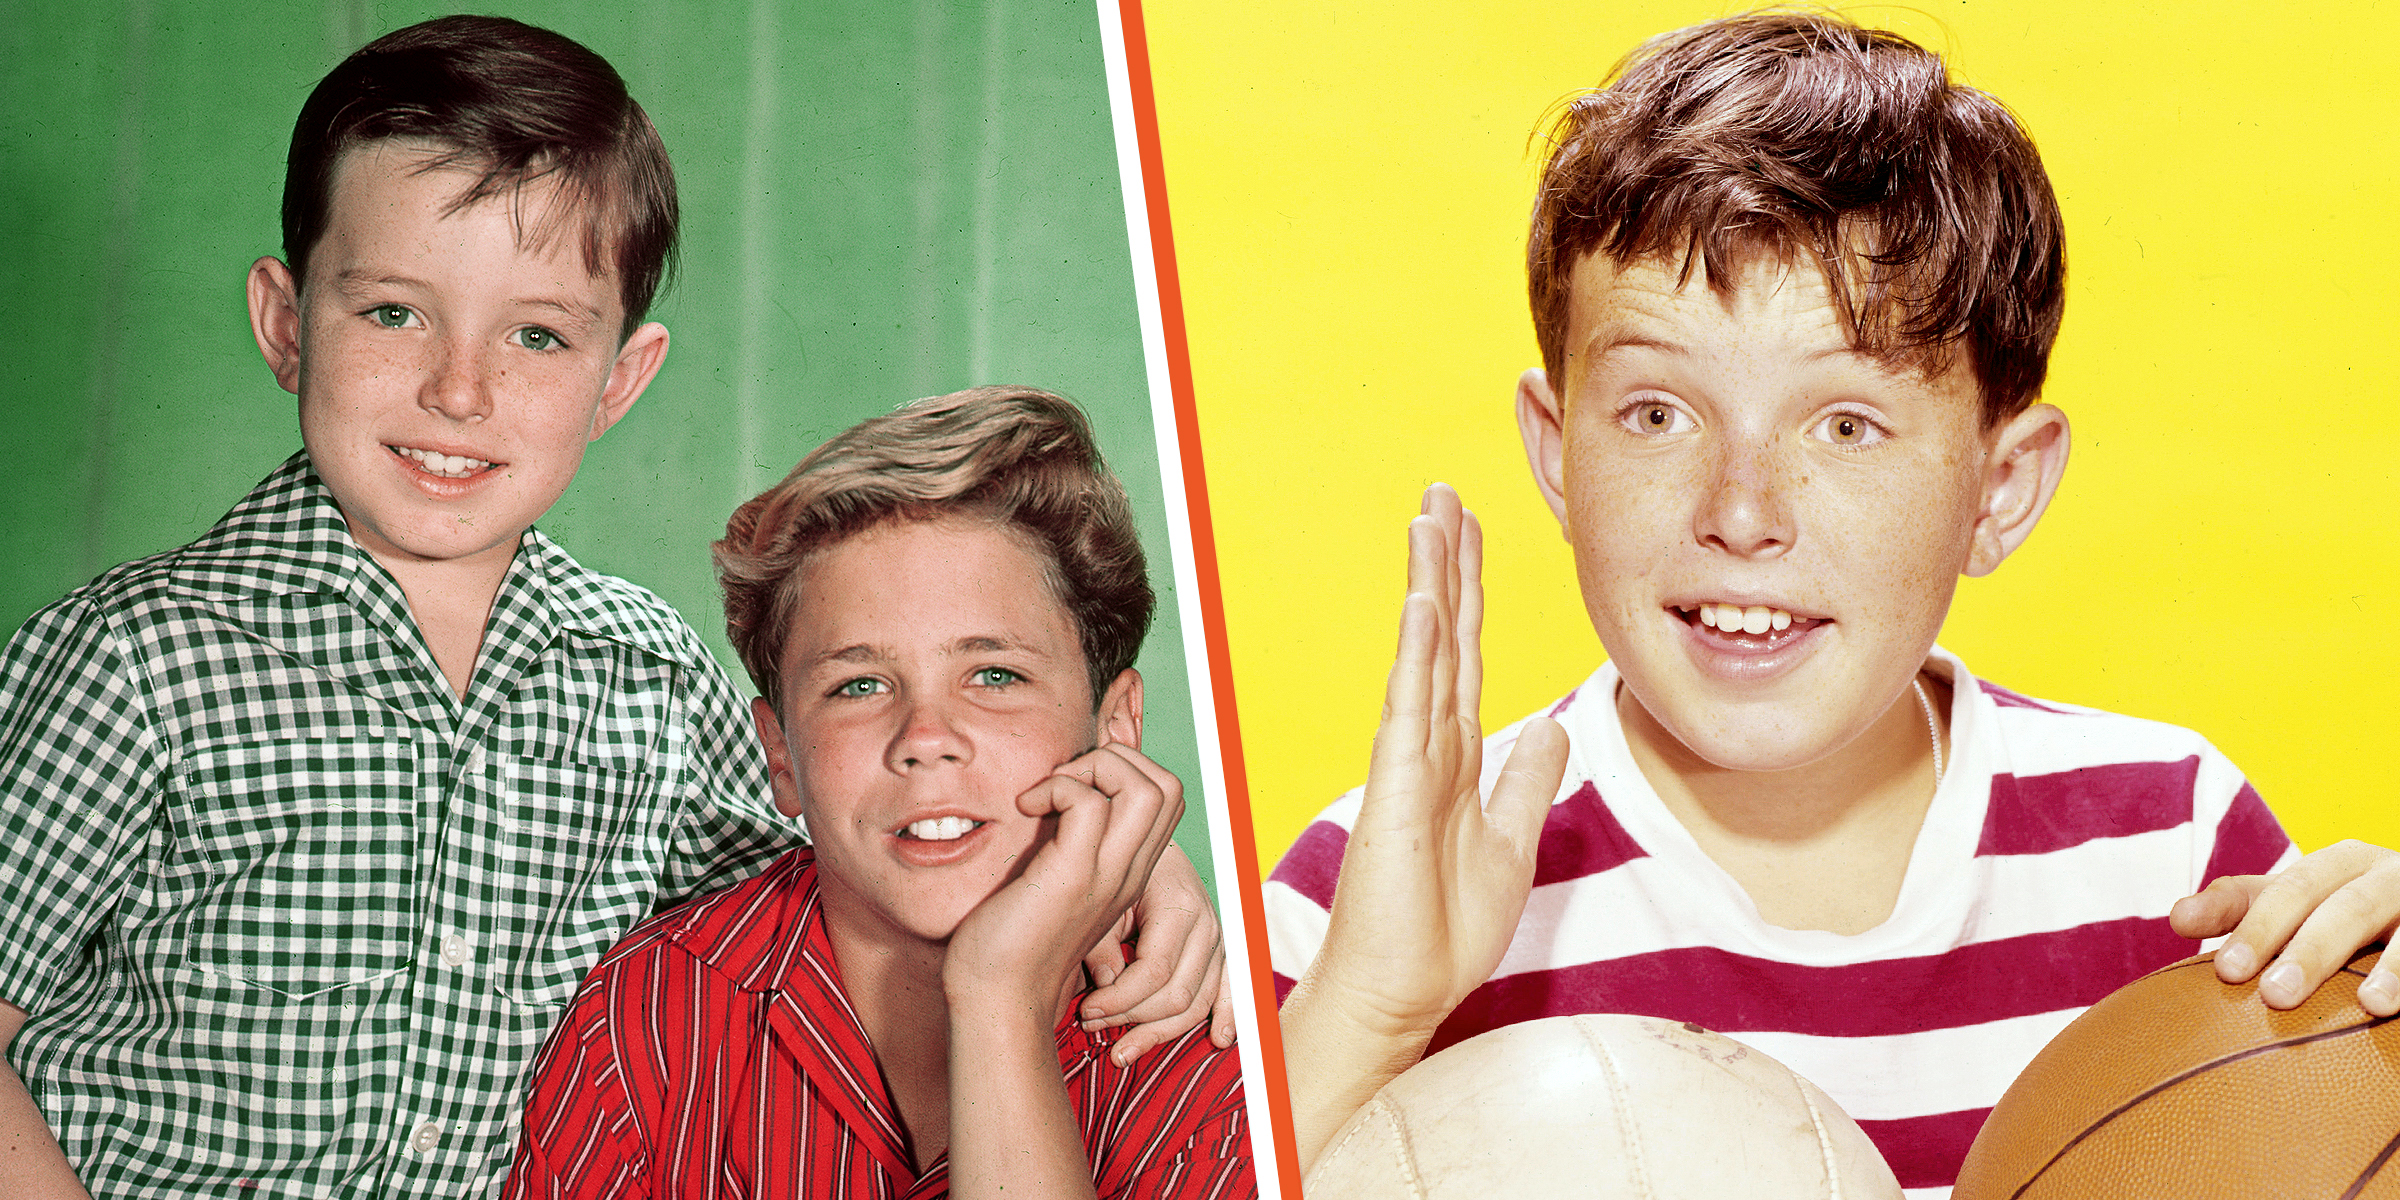 Jerry Mathers and Tony Dow | Source: Getty Images